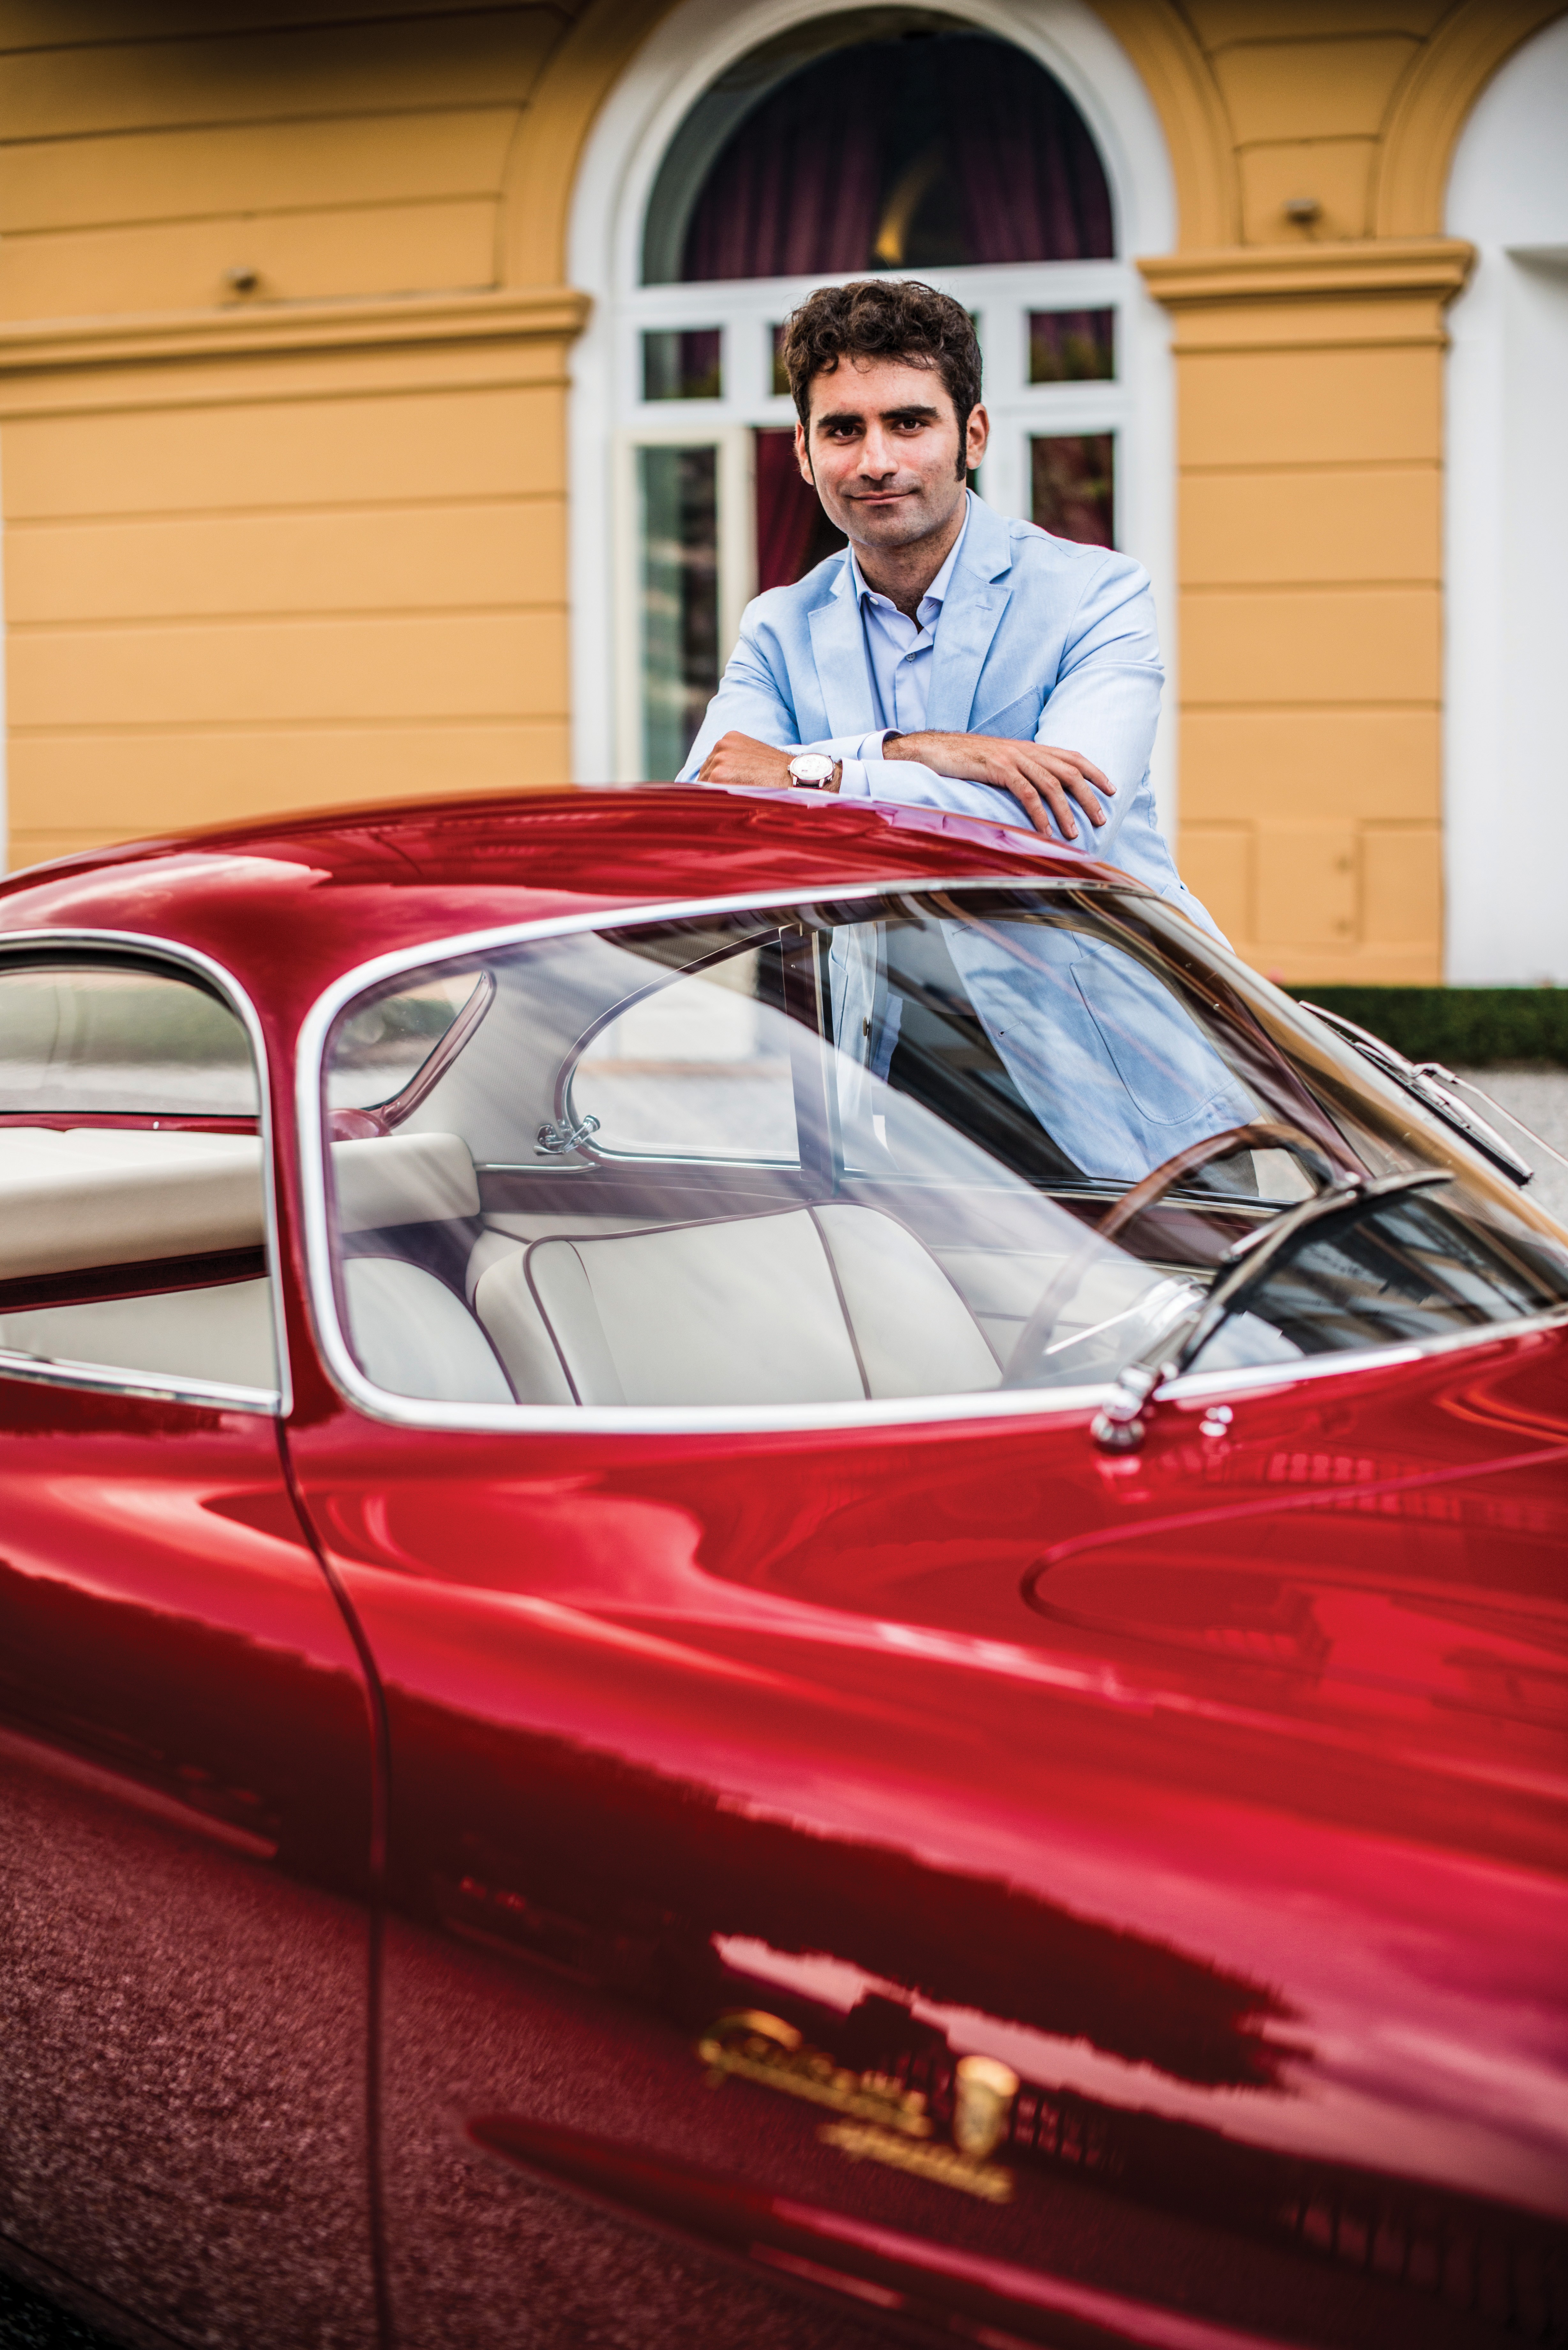 Duccio Lopresto says he is happiest when he is surrounded by beauty; in this case, his 1957 Alfa Romeo Giulietta SS Prototipo. Photo: Rémi Dargegen